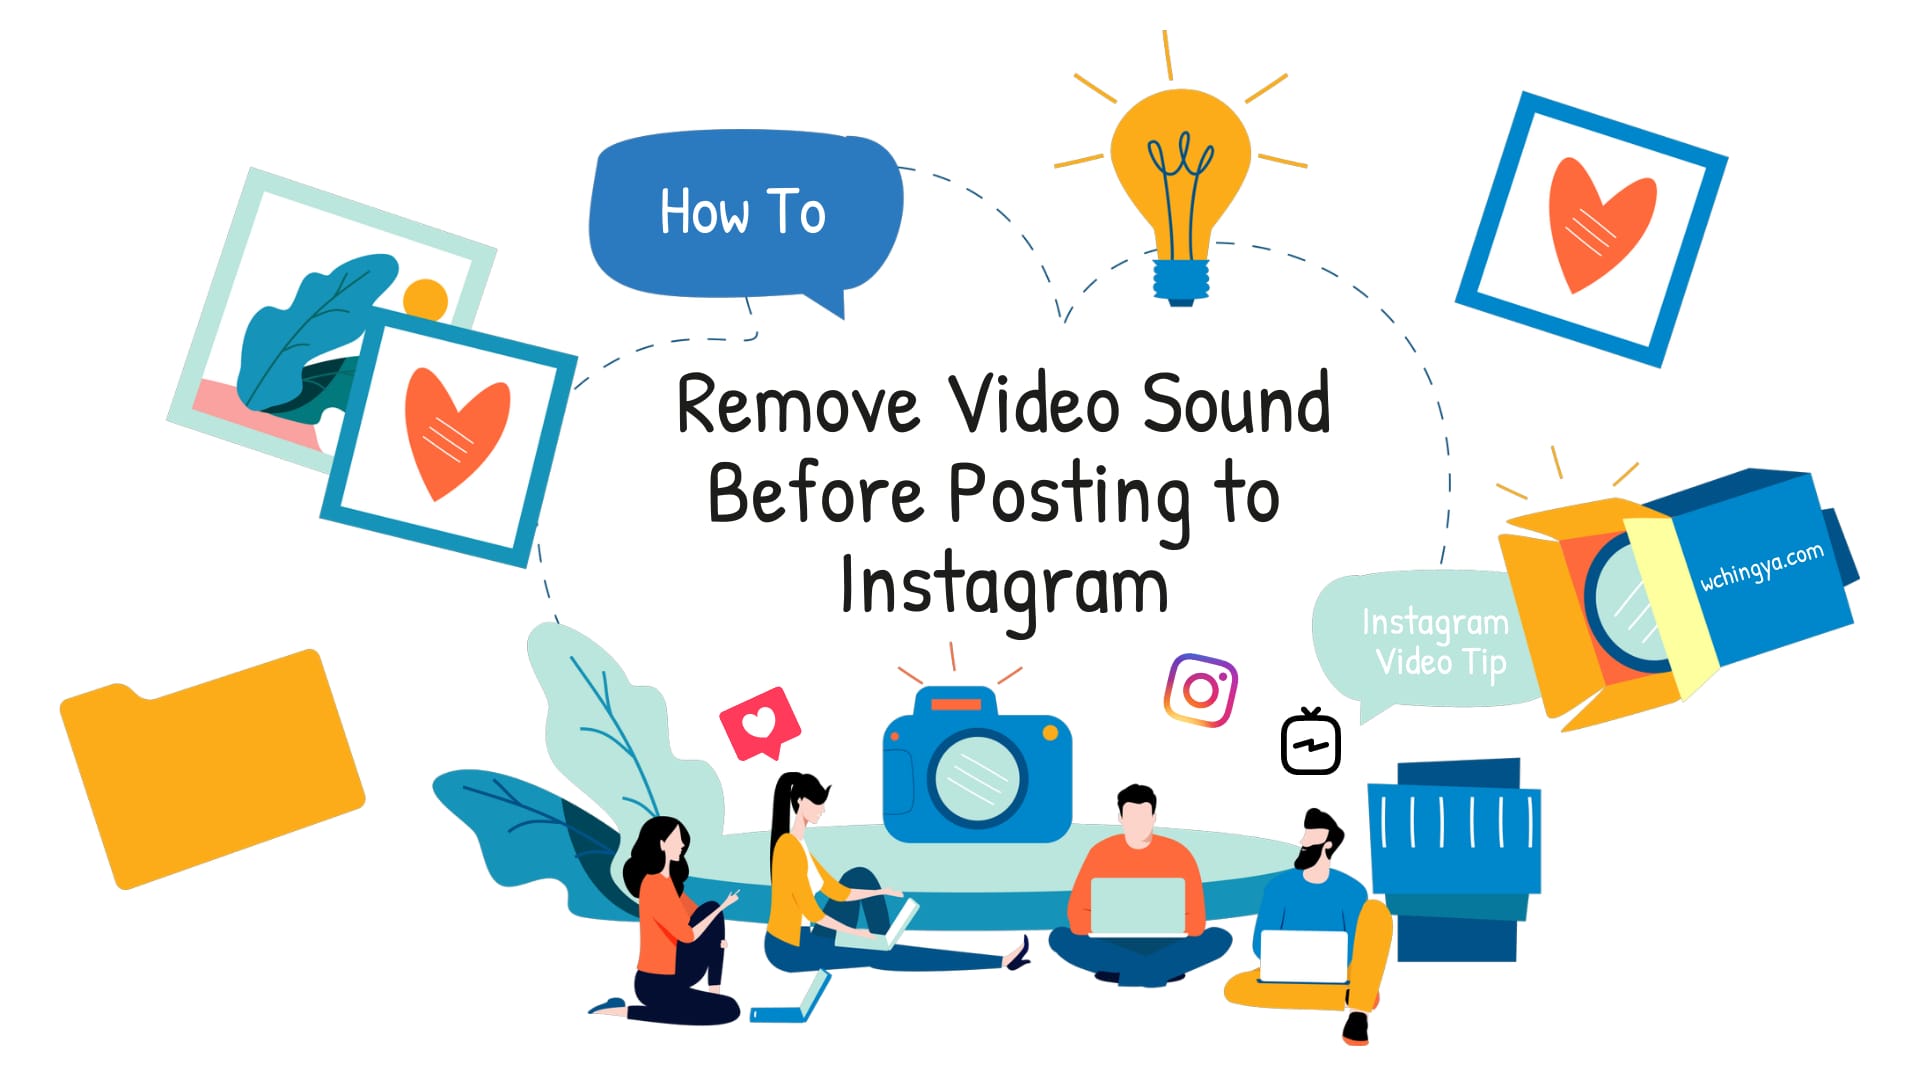 How to remove video sound before posting to Instagram